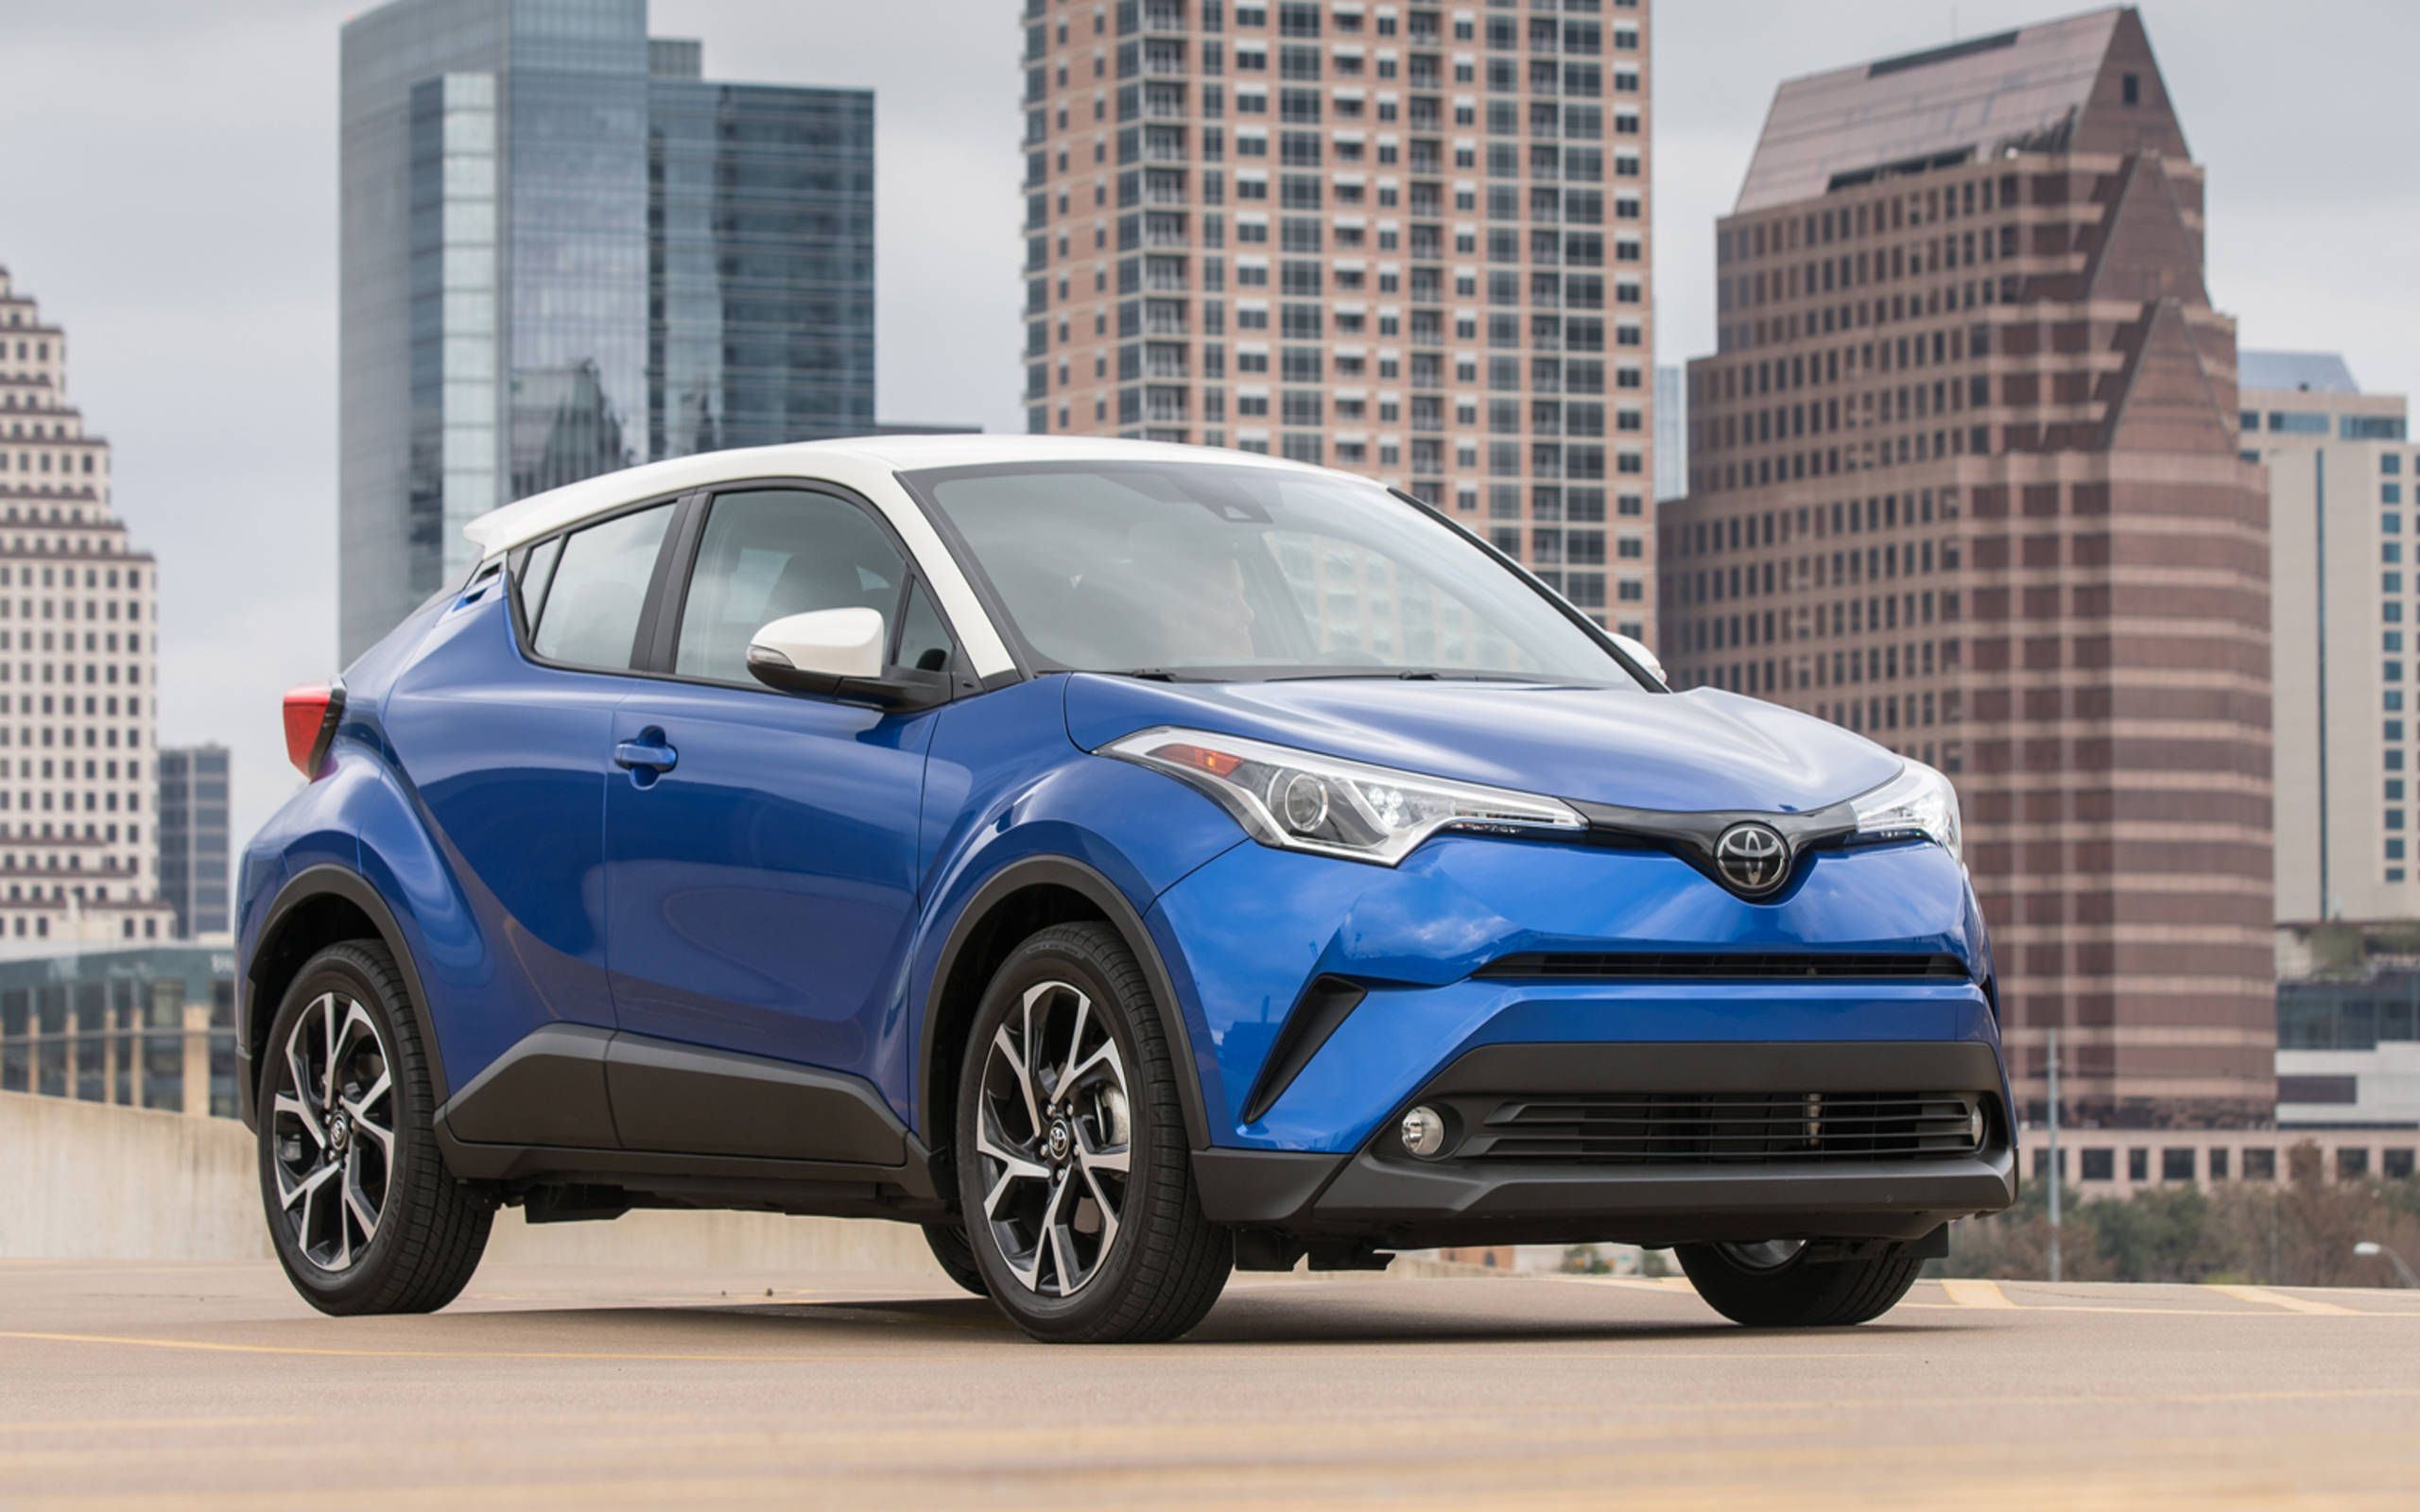 2019 Toyota CH-R essentials: The looks will sell it, or not